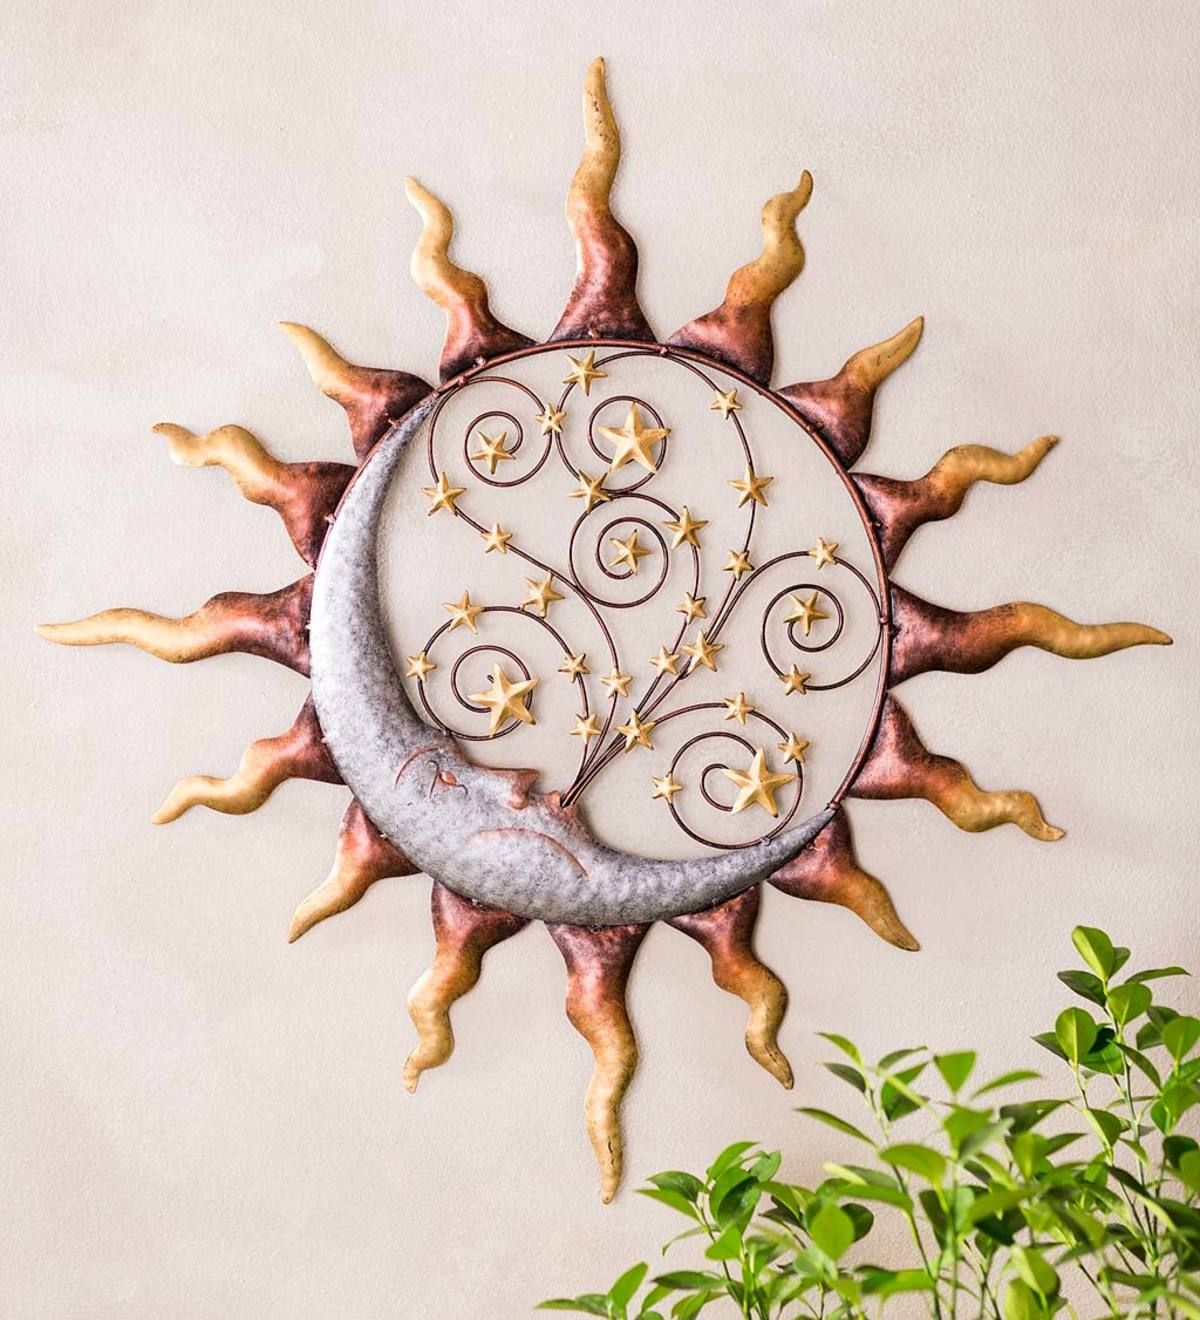 Handcrafted Metal Sun, Stars And Blowing Moon Wall Art | Wind And Weather Pertaining To Most Recently Released Sun Moon Star Wall Art (View 5 of 20)